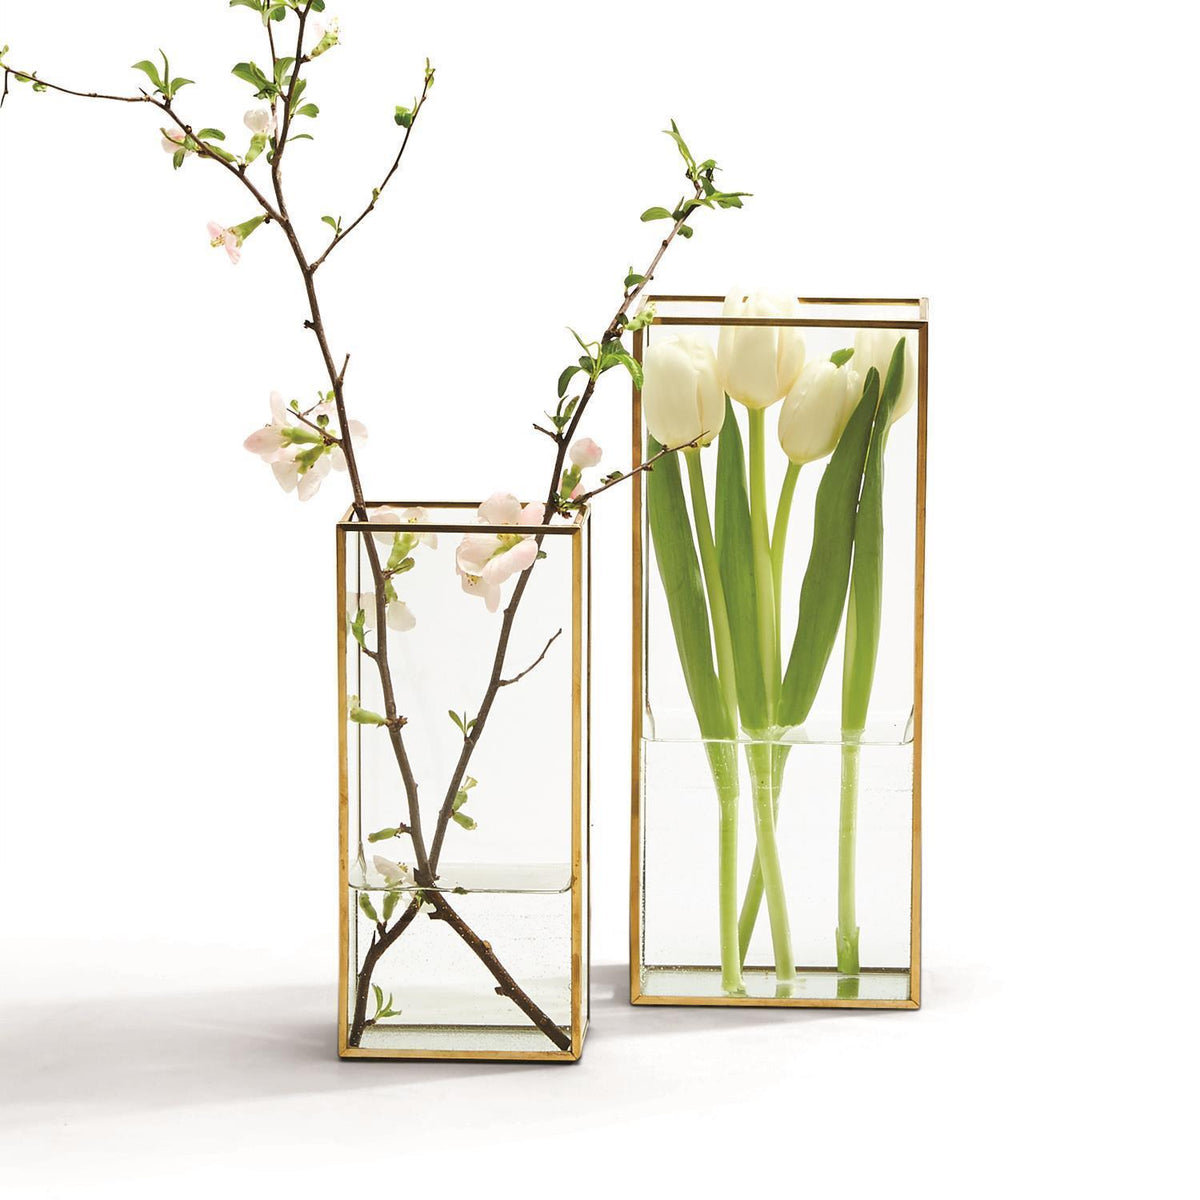 Watertight clear glass vases with flowers